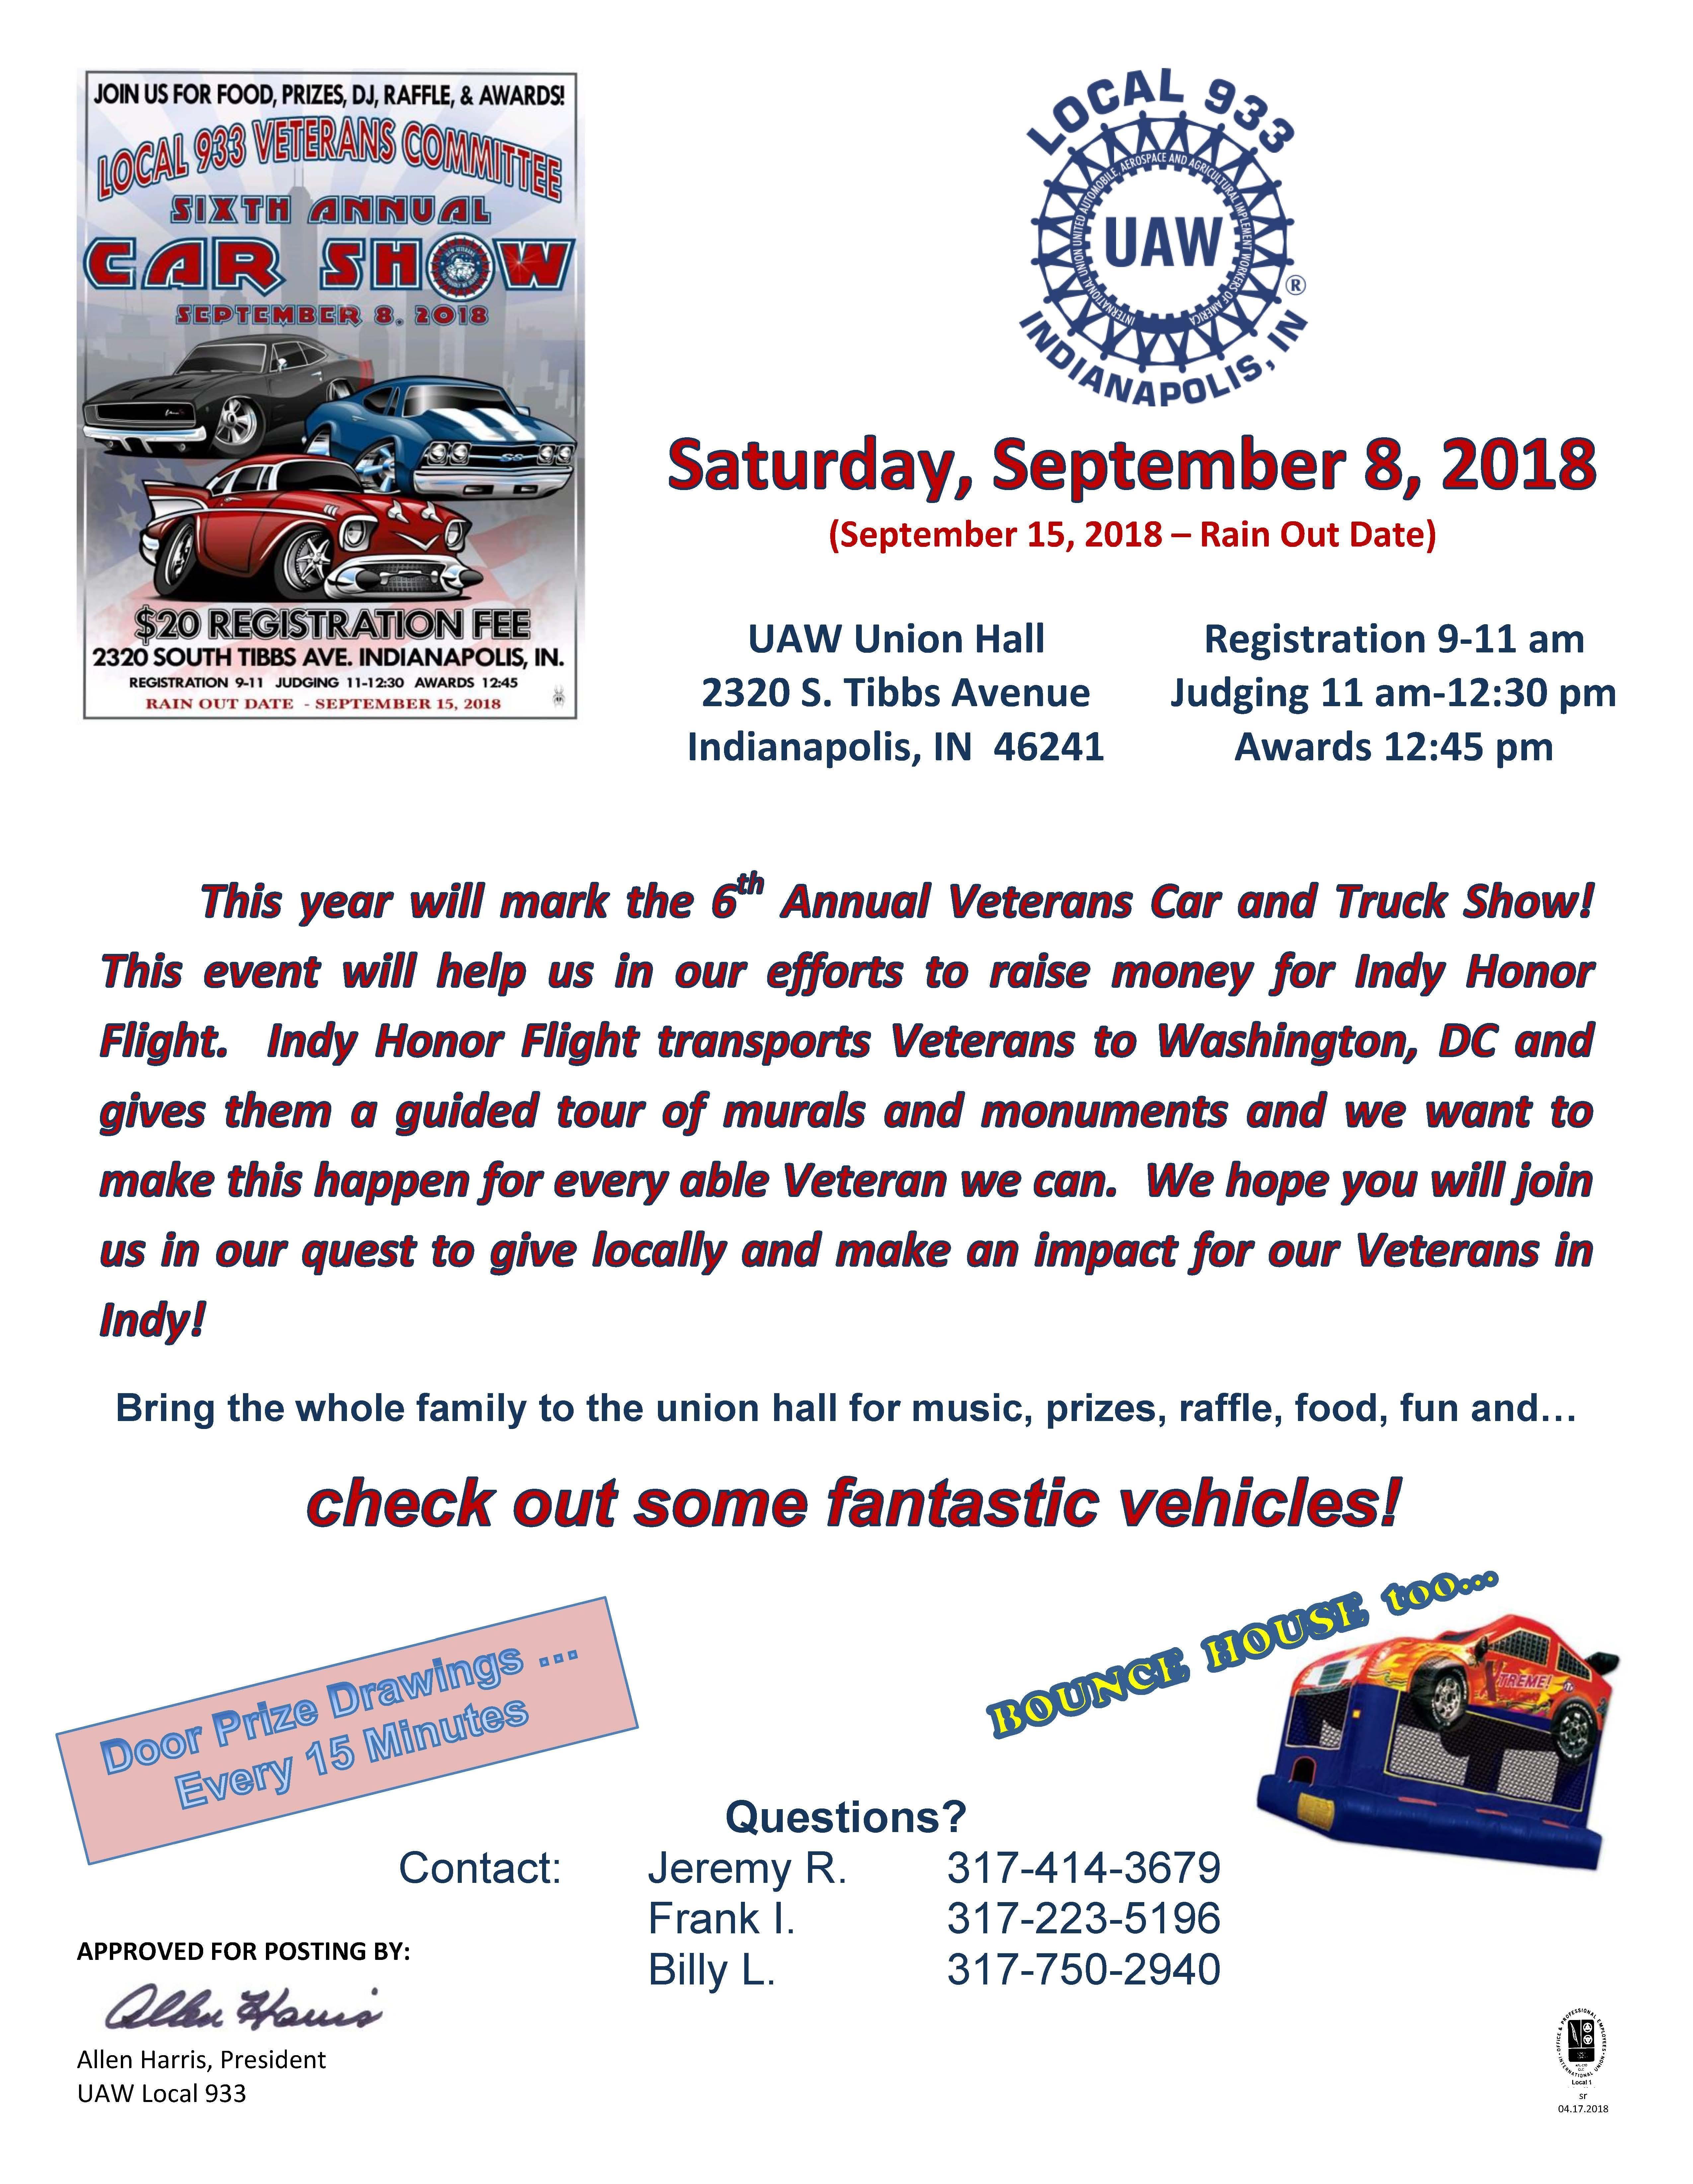 UAW Veterans Logo - 6th Annual Veterans Car and Truck Show | UAW Local 933